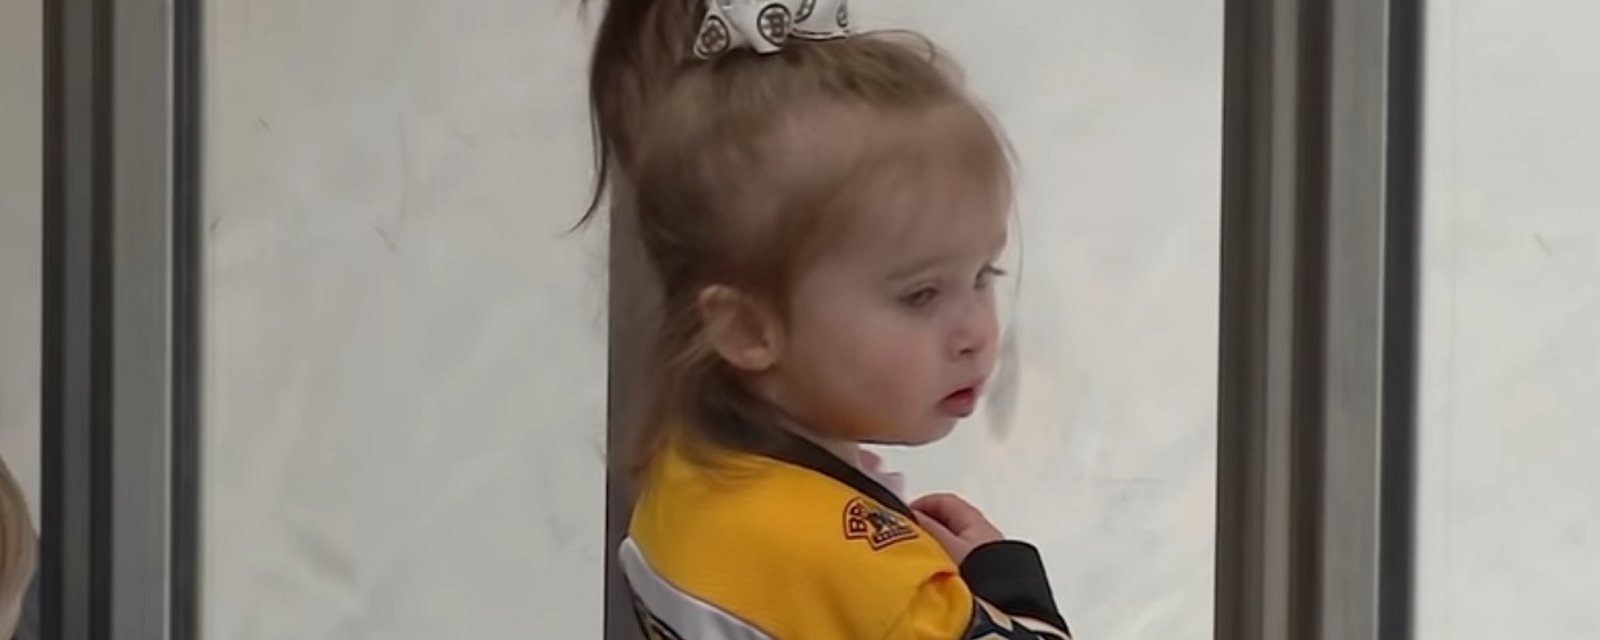 Brad Marchand shares a beautiful moment with his daughter.